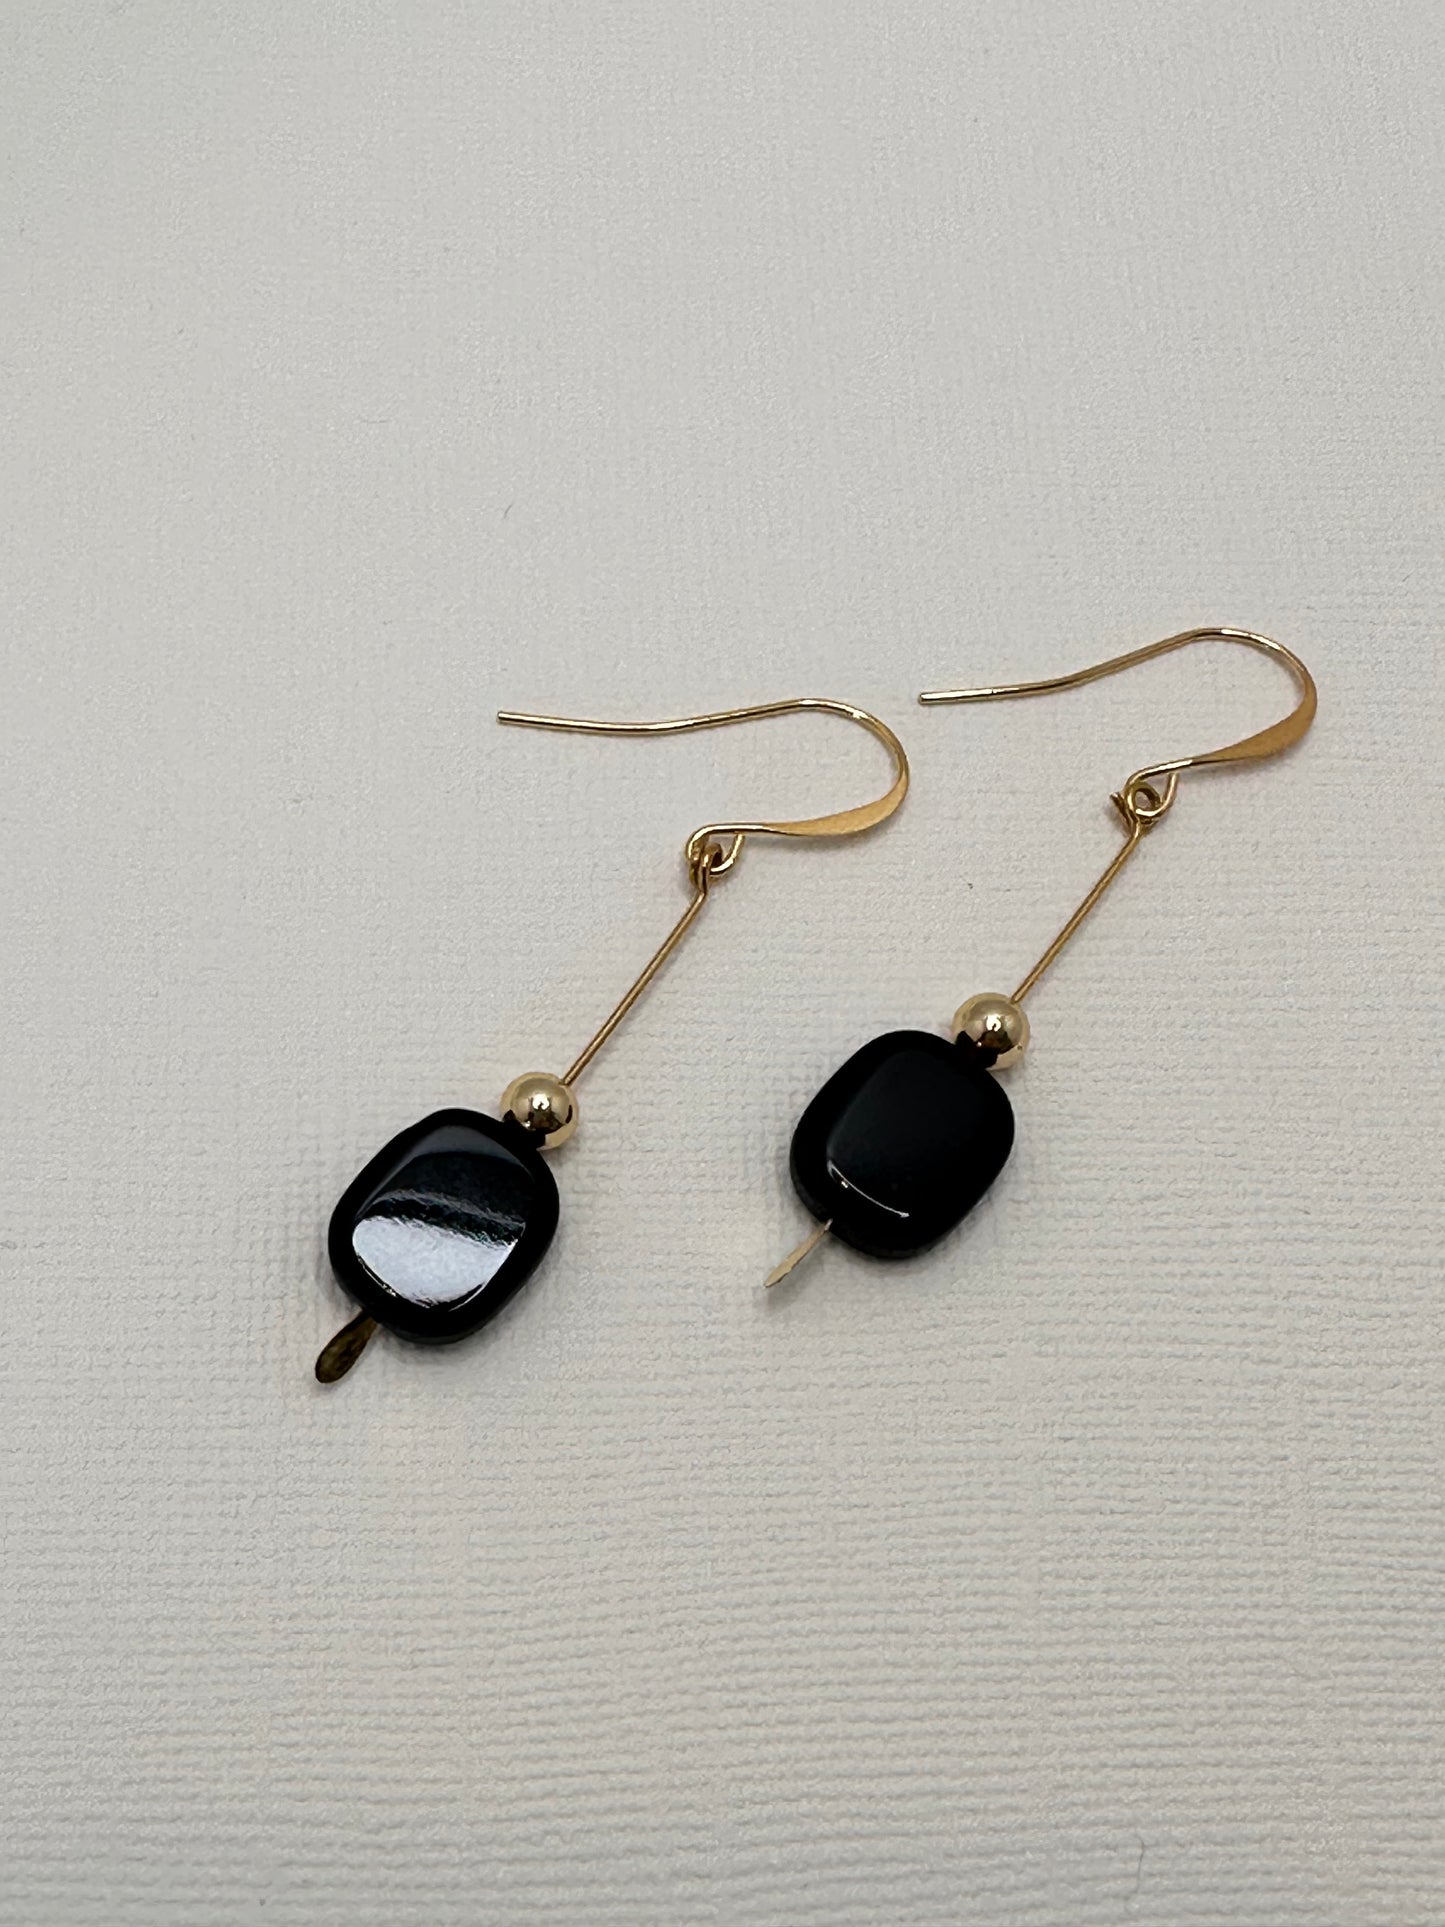 Gold and Black Earrings